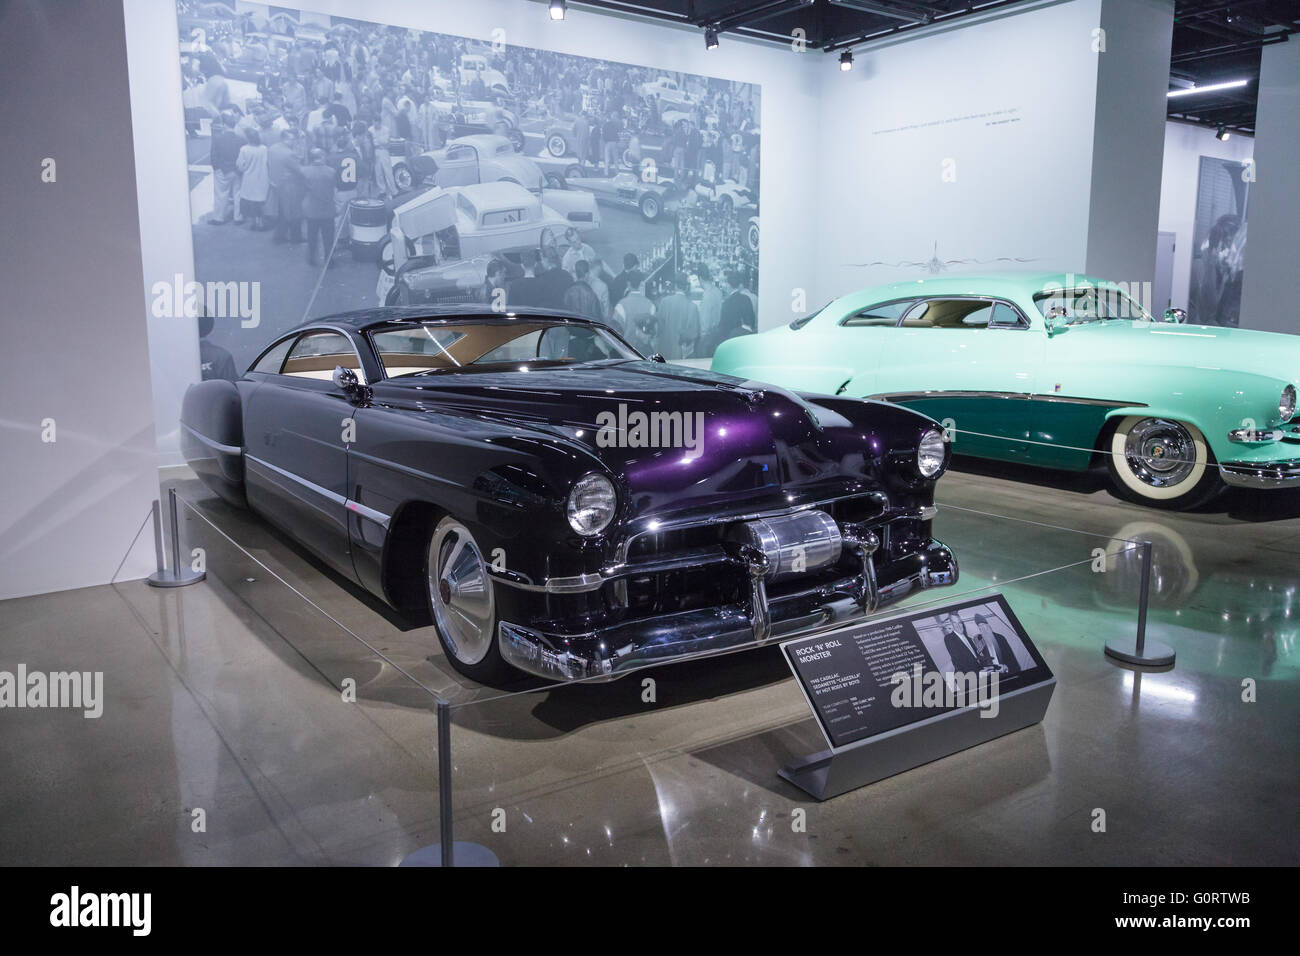 Purple 1948 Cadillac Sedanette reproduction called CadZZilla from the collection of rock band ZZ Top guitarist Billy Gibbons Stock Photo